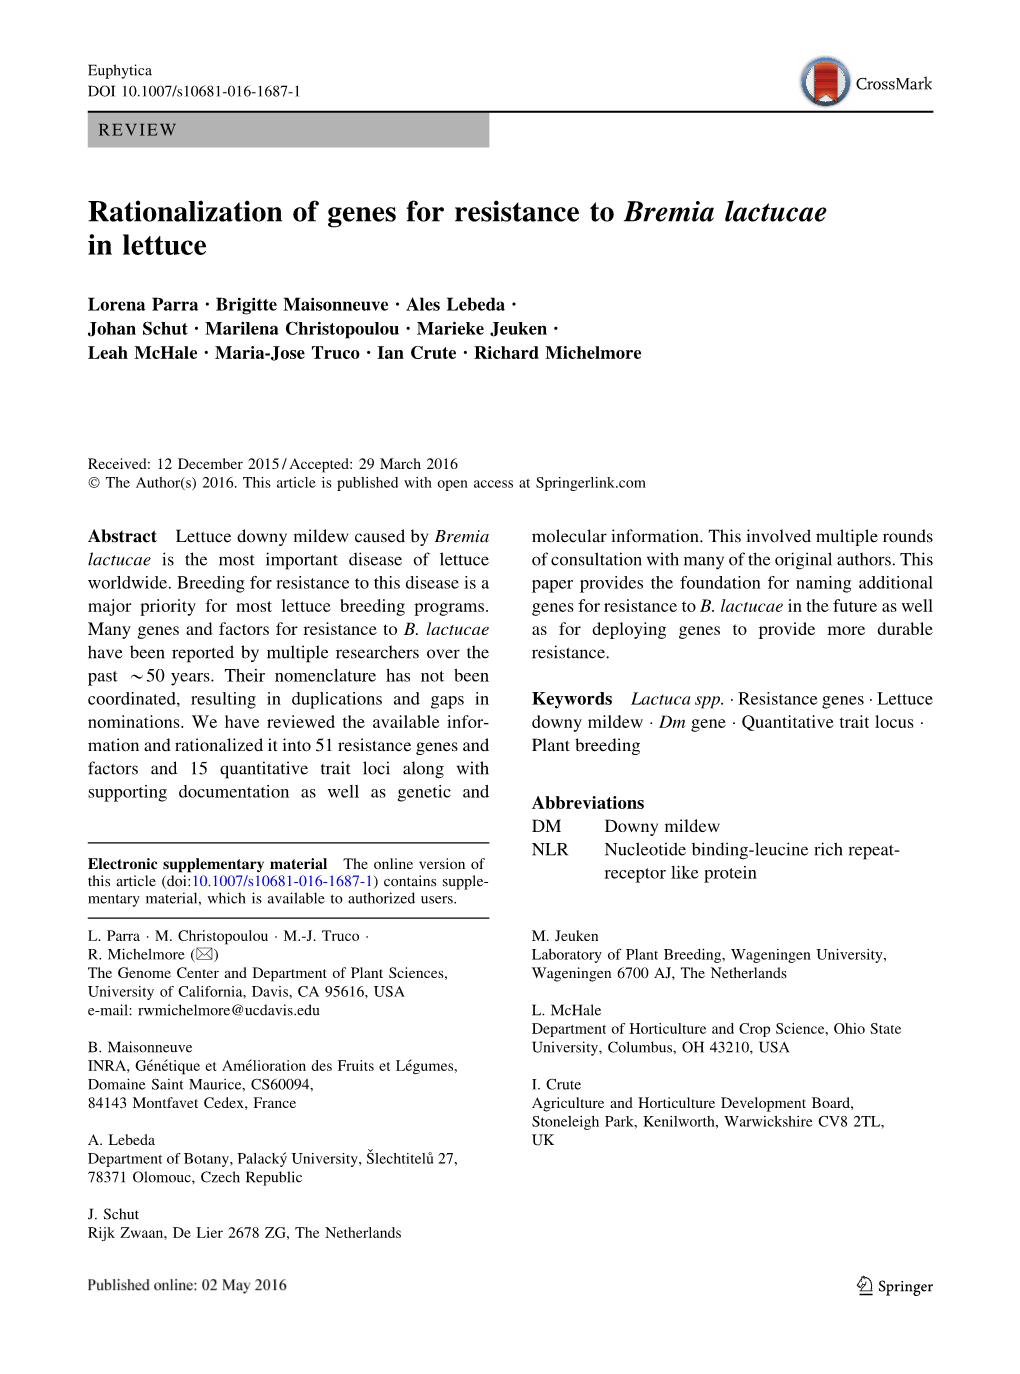 Rationalization of Genes for Resistance to Bremia Lactucae in Lettuce